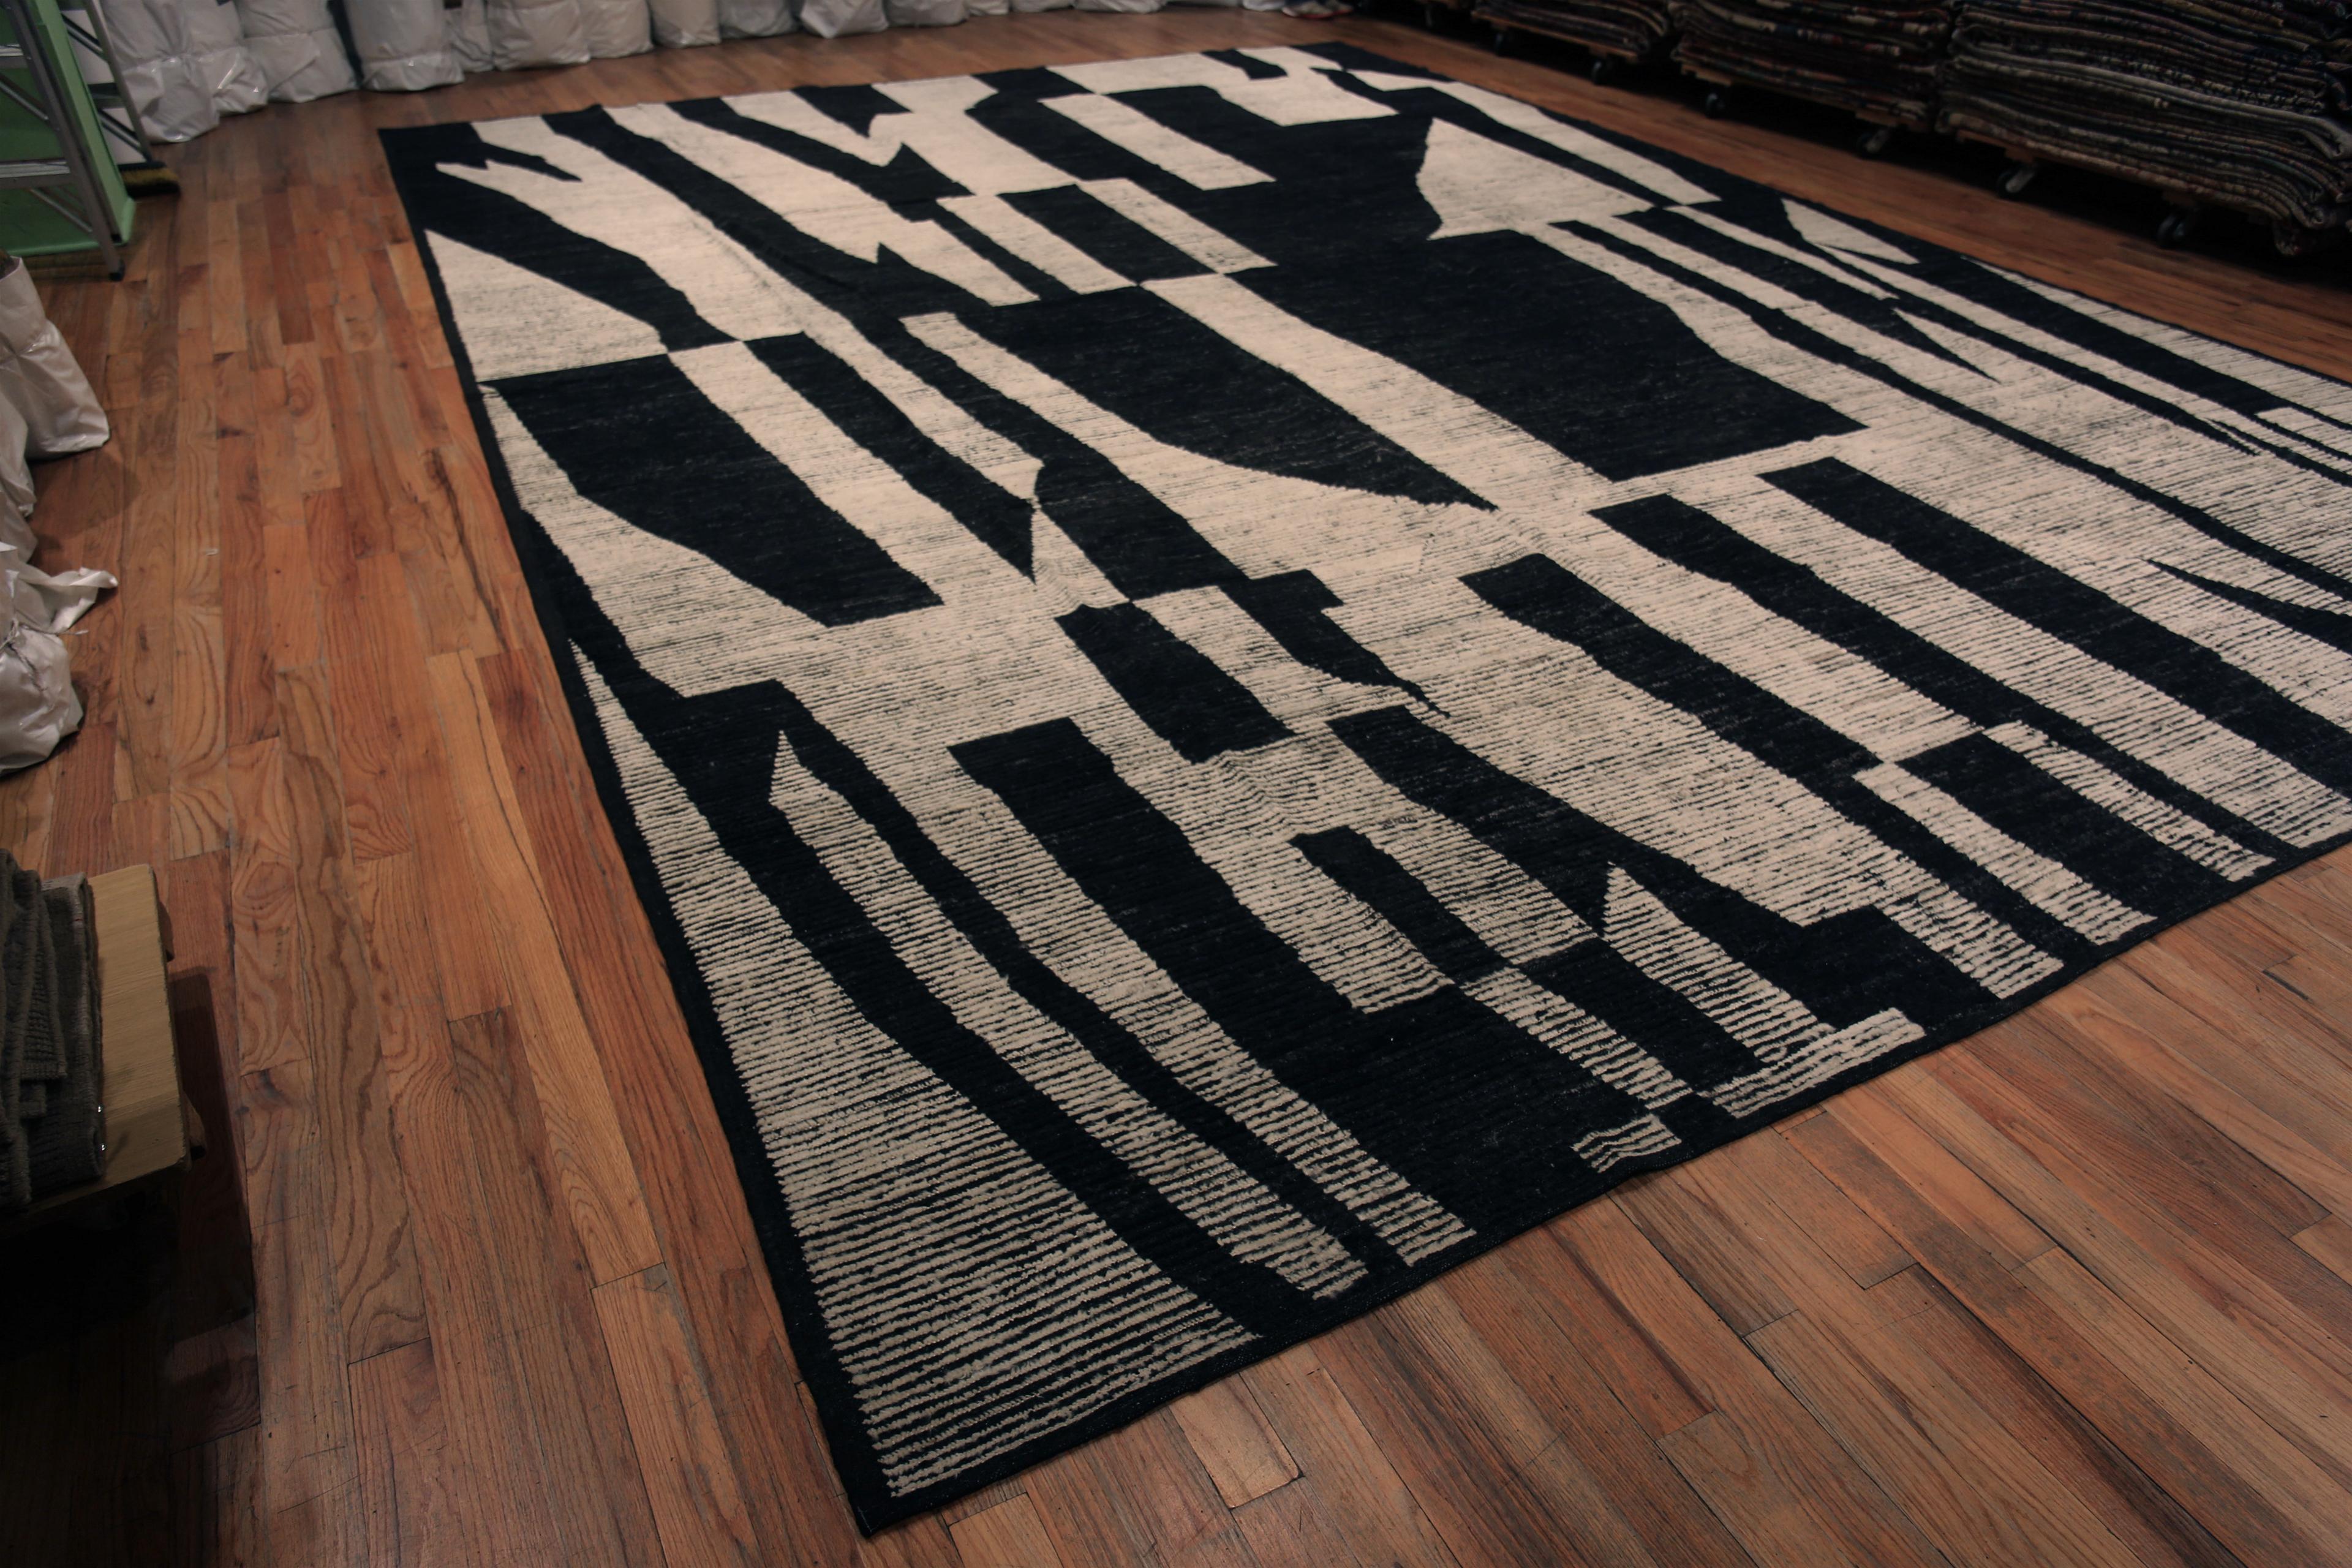 Captivating Graphic and Bold Black and White Color Tribal Geometric Design Oversized Modern Area Rug, Country Of Origin: Central Asia, Circa Date: Modern Rug 